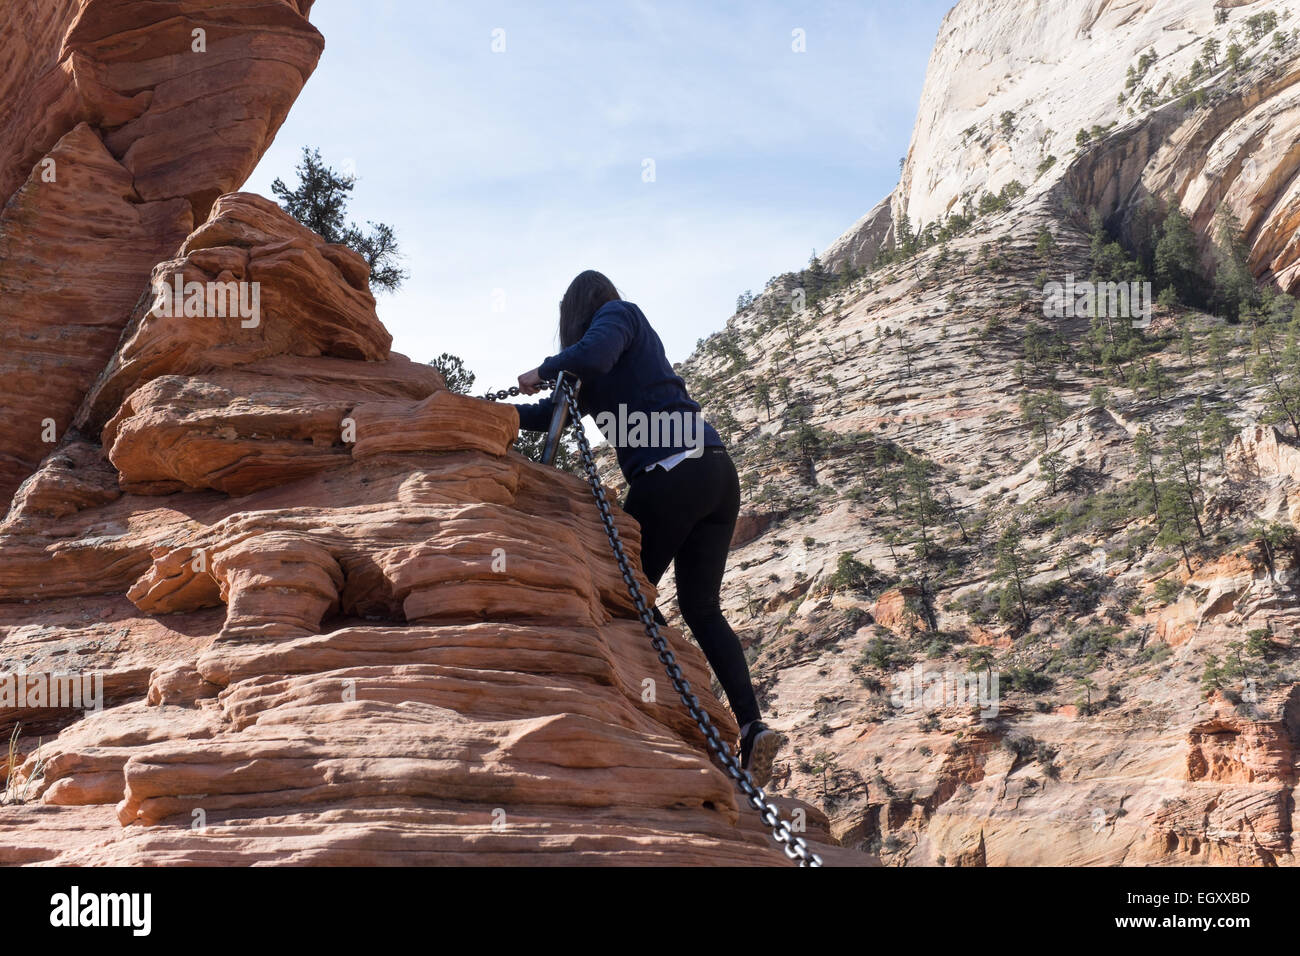 A woman traverses the chains on the Angel's Landing trail in Zion National Park, UT, USA. Stock Photo